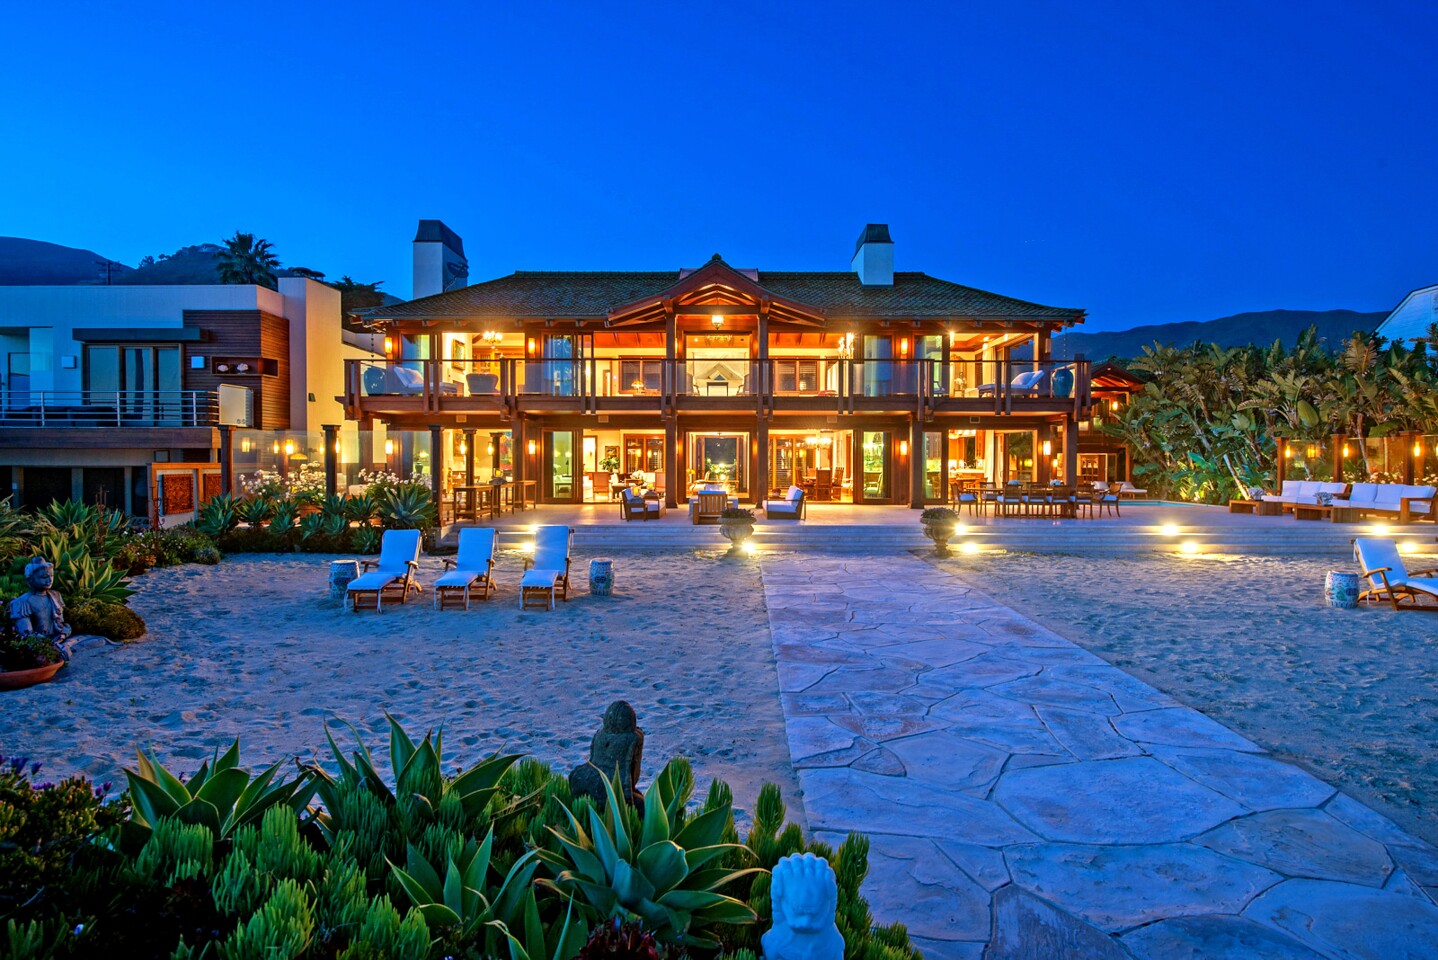 "James Bond" star Pierce Brosnan is shooting for nine figures in Malibu, where his Thai-inspired retreat on Broad Beach just hit the market for $100 million. The oceanfront retreat spans more than an acre with two homes that combine for five bedrooms and 14 bathrooms. Past a pair of carved teak gates, the verdant grounds are filled with palm trees, tropical flowers, travertine courtyards and wraparound lanais.